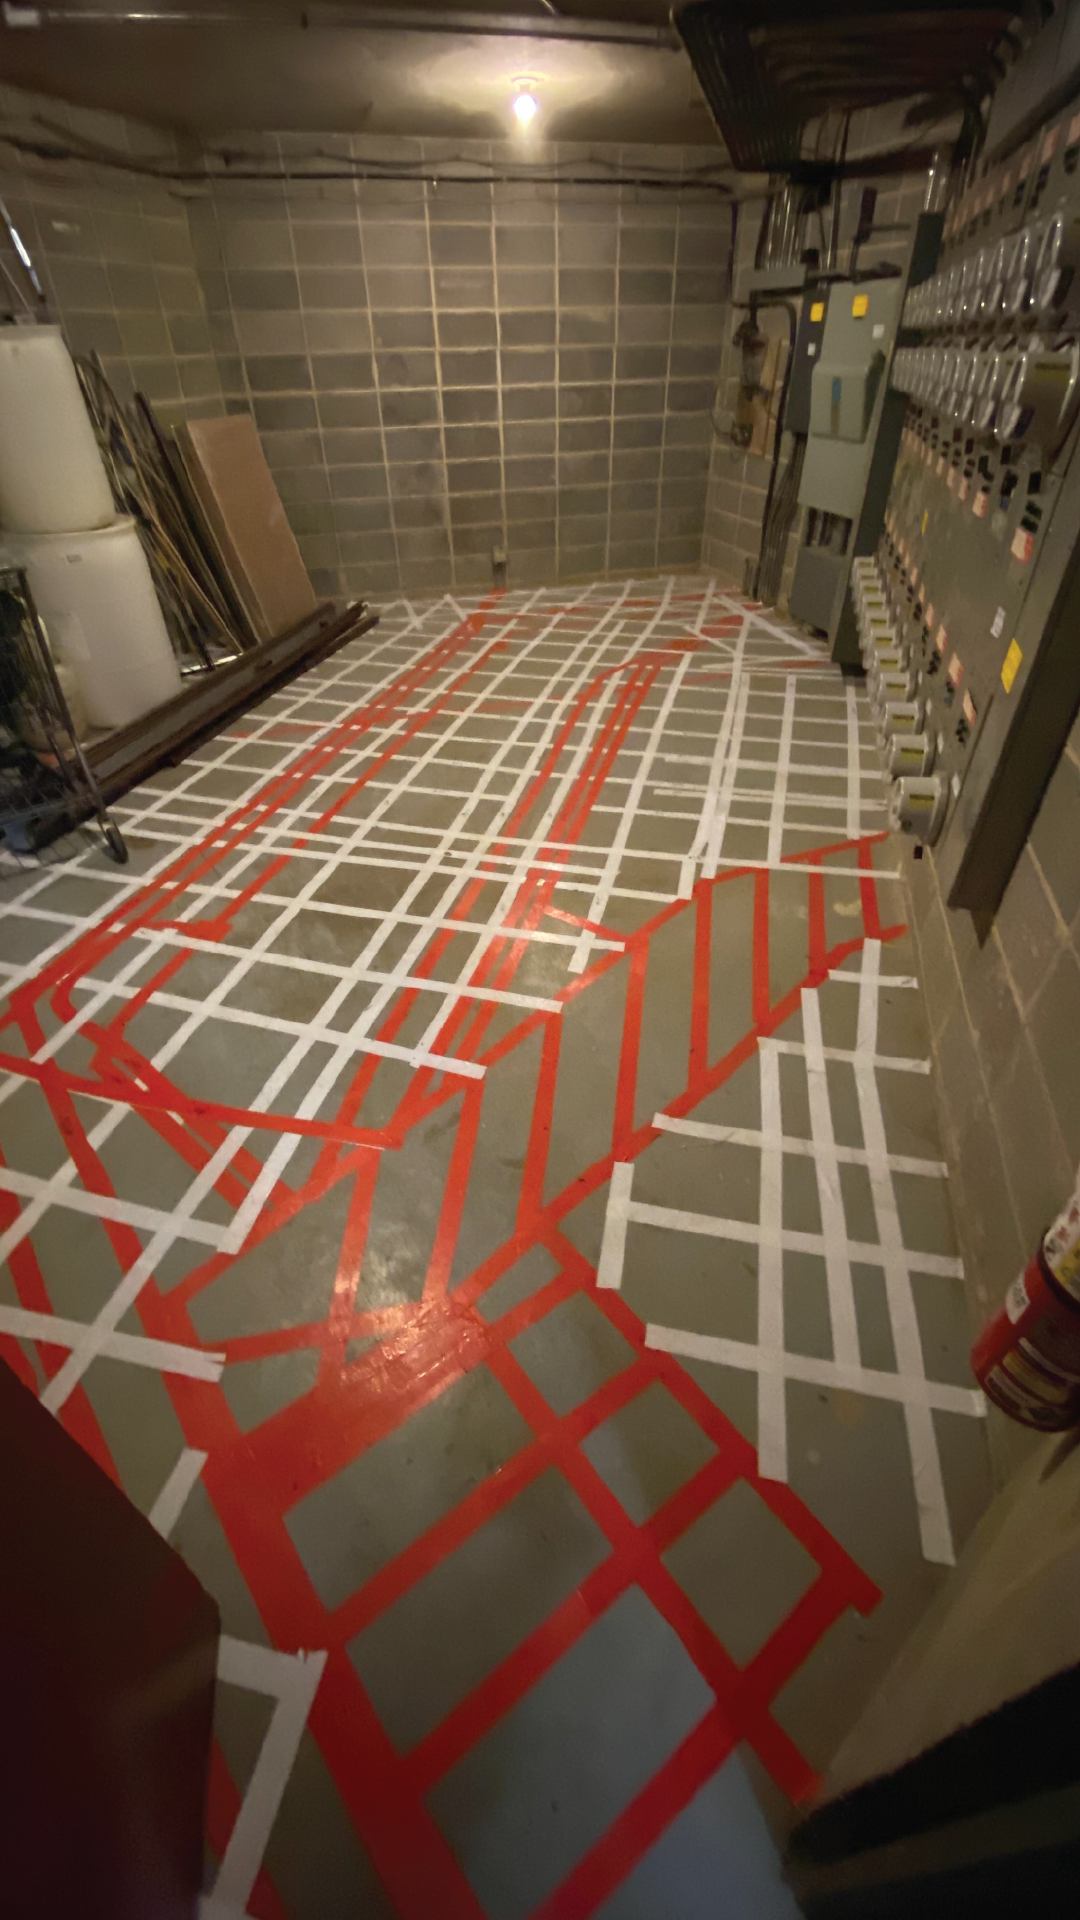 A room with a lot of red and white tape on the floor to show where the underground utilities are found.